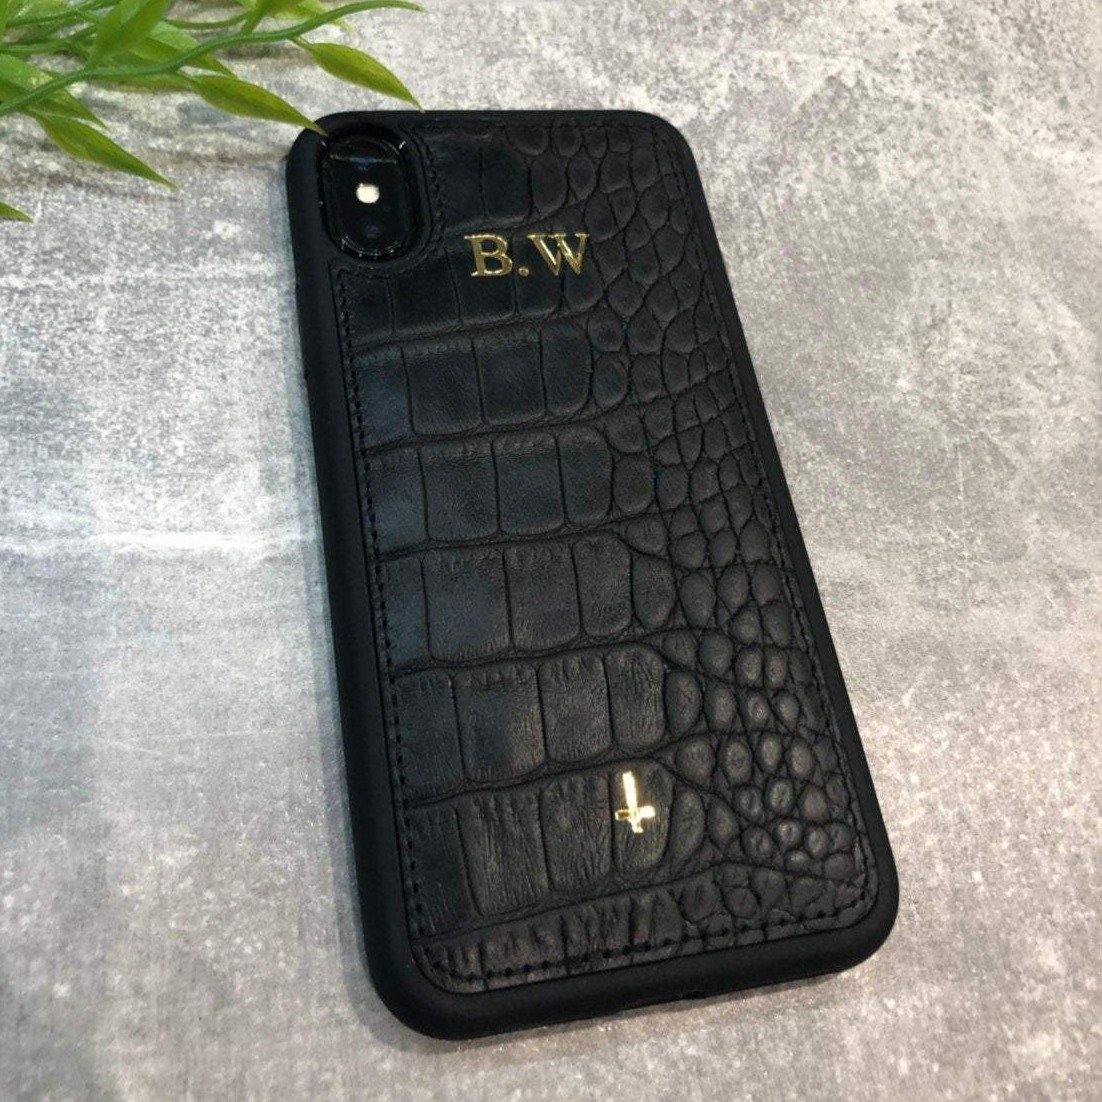 iPhone XR genuine leather phone case personalised with name or initials - PersonalisebyLisa